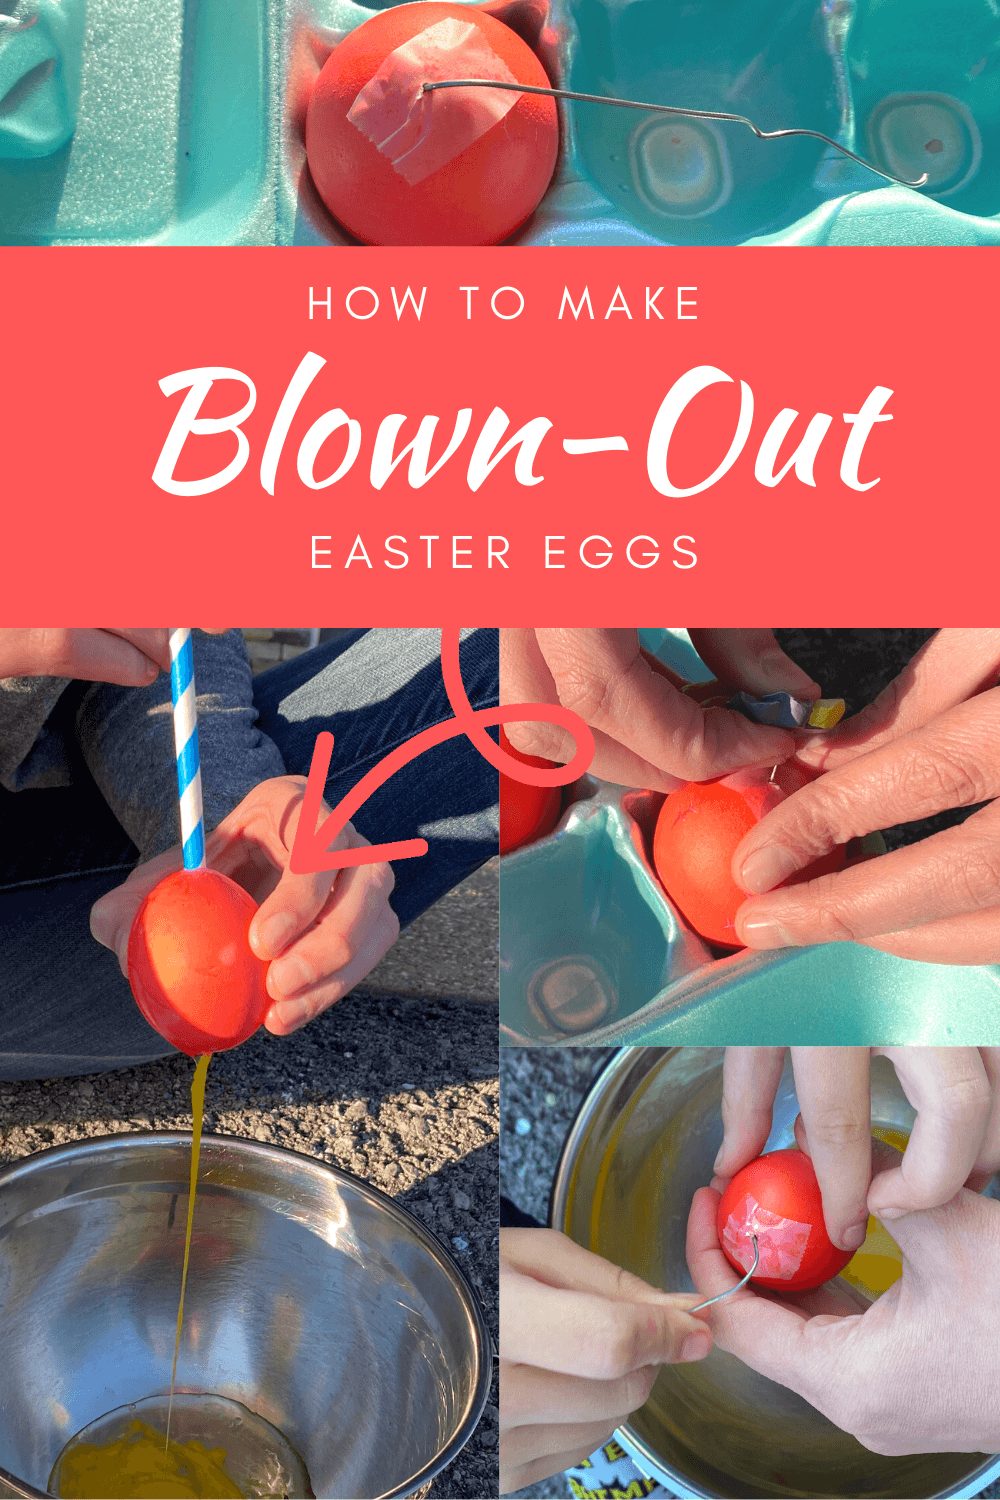 Wondering how to "Hollow Out An Egg?" Maybe it is your first time trying to blow out Easter Eggs with kids. Check-out these 8 tips by Arts & Bricks before getting started.